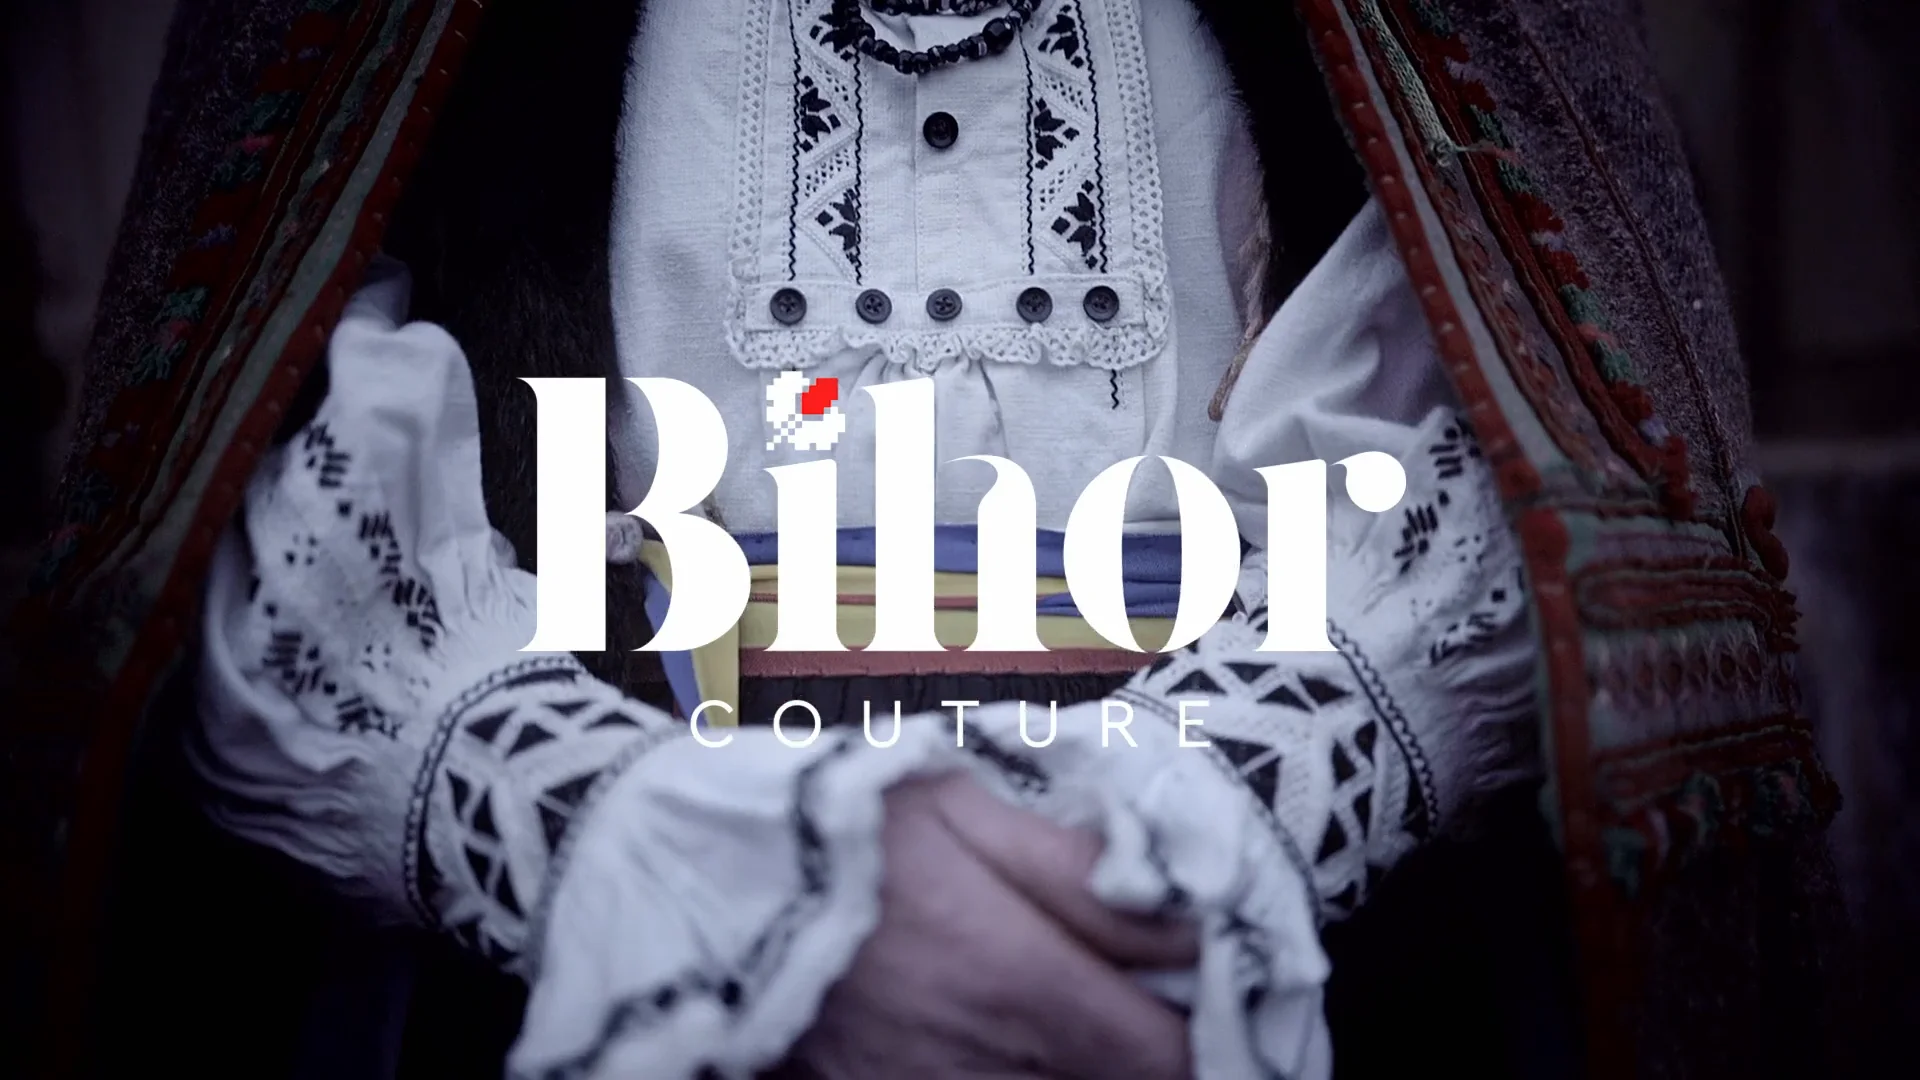 Dior Knocked Out by Bihor Couture